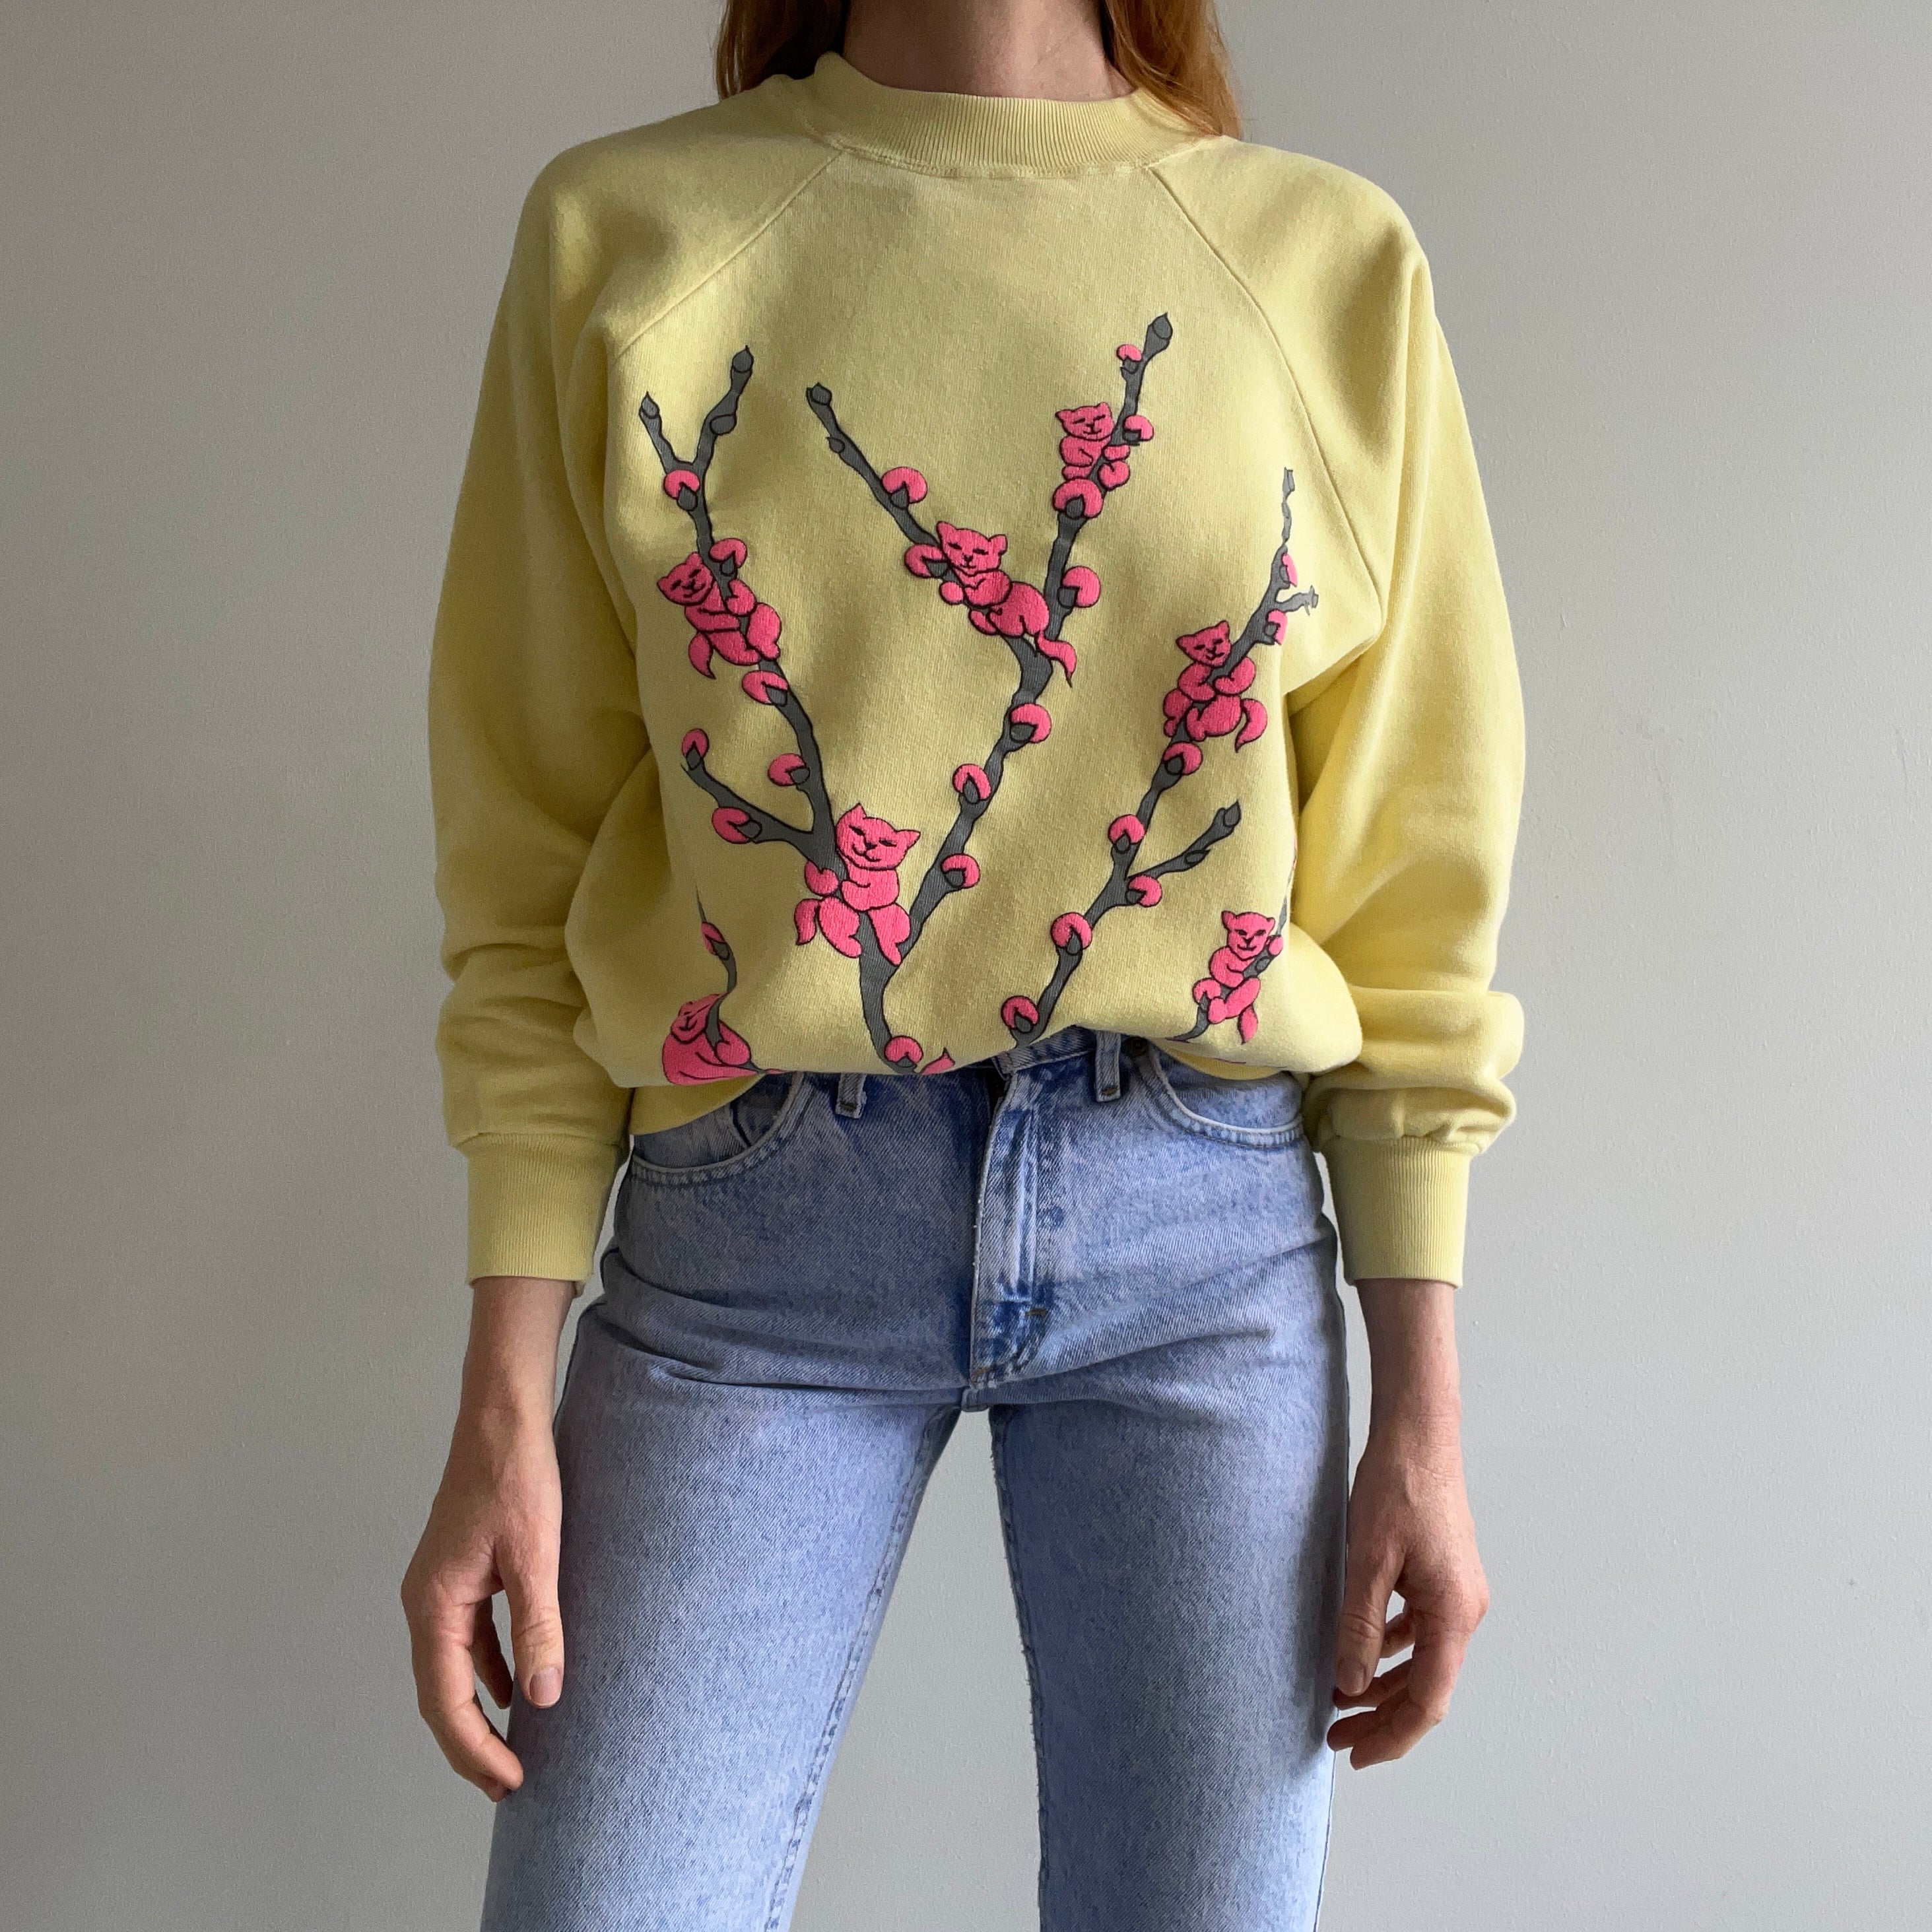 1980s Pussy Willows - But, Literally - Sweatshirt - WOW